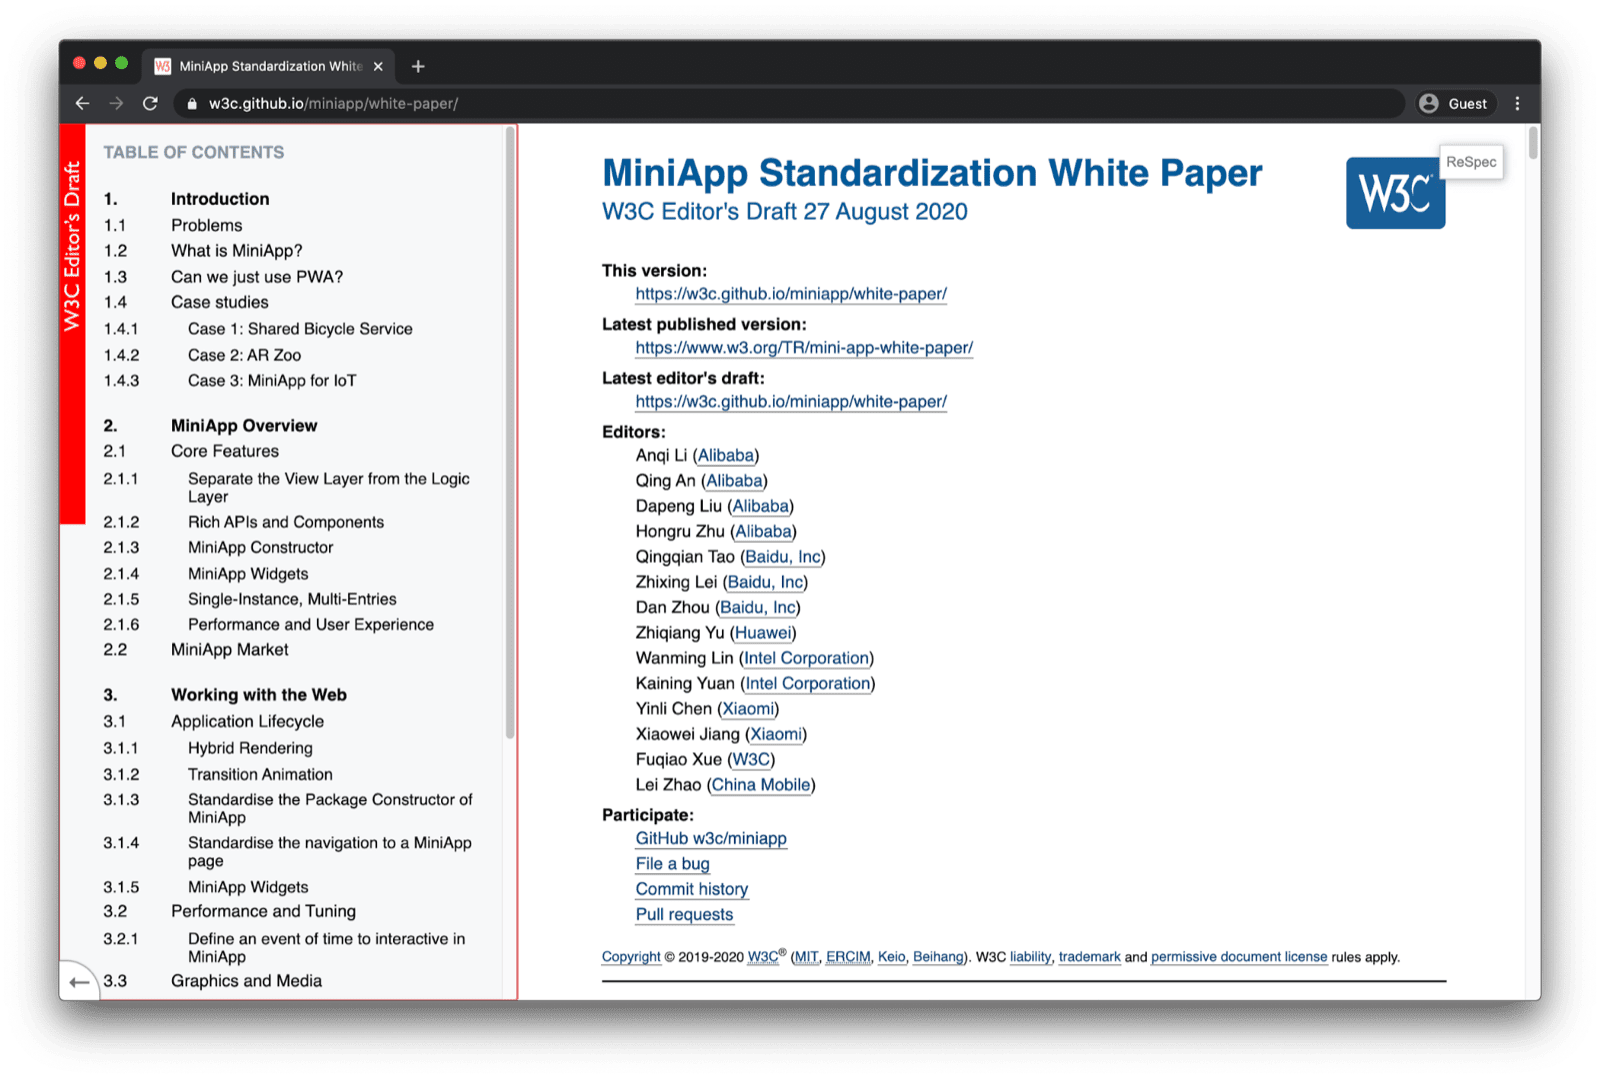 The header of the MiniApp Standardization White Paper in a browser window.